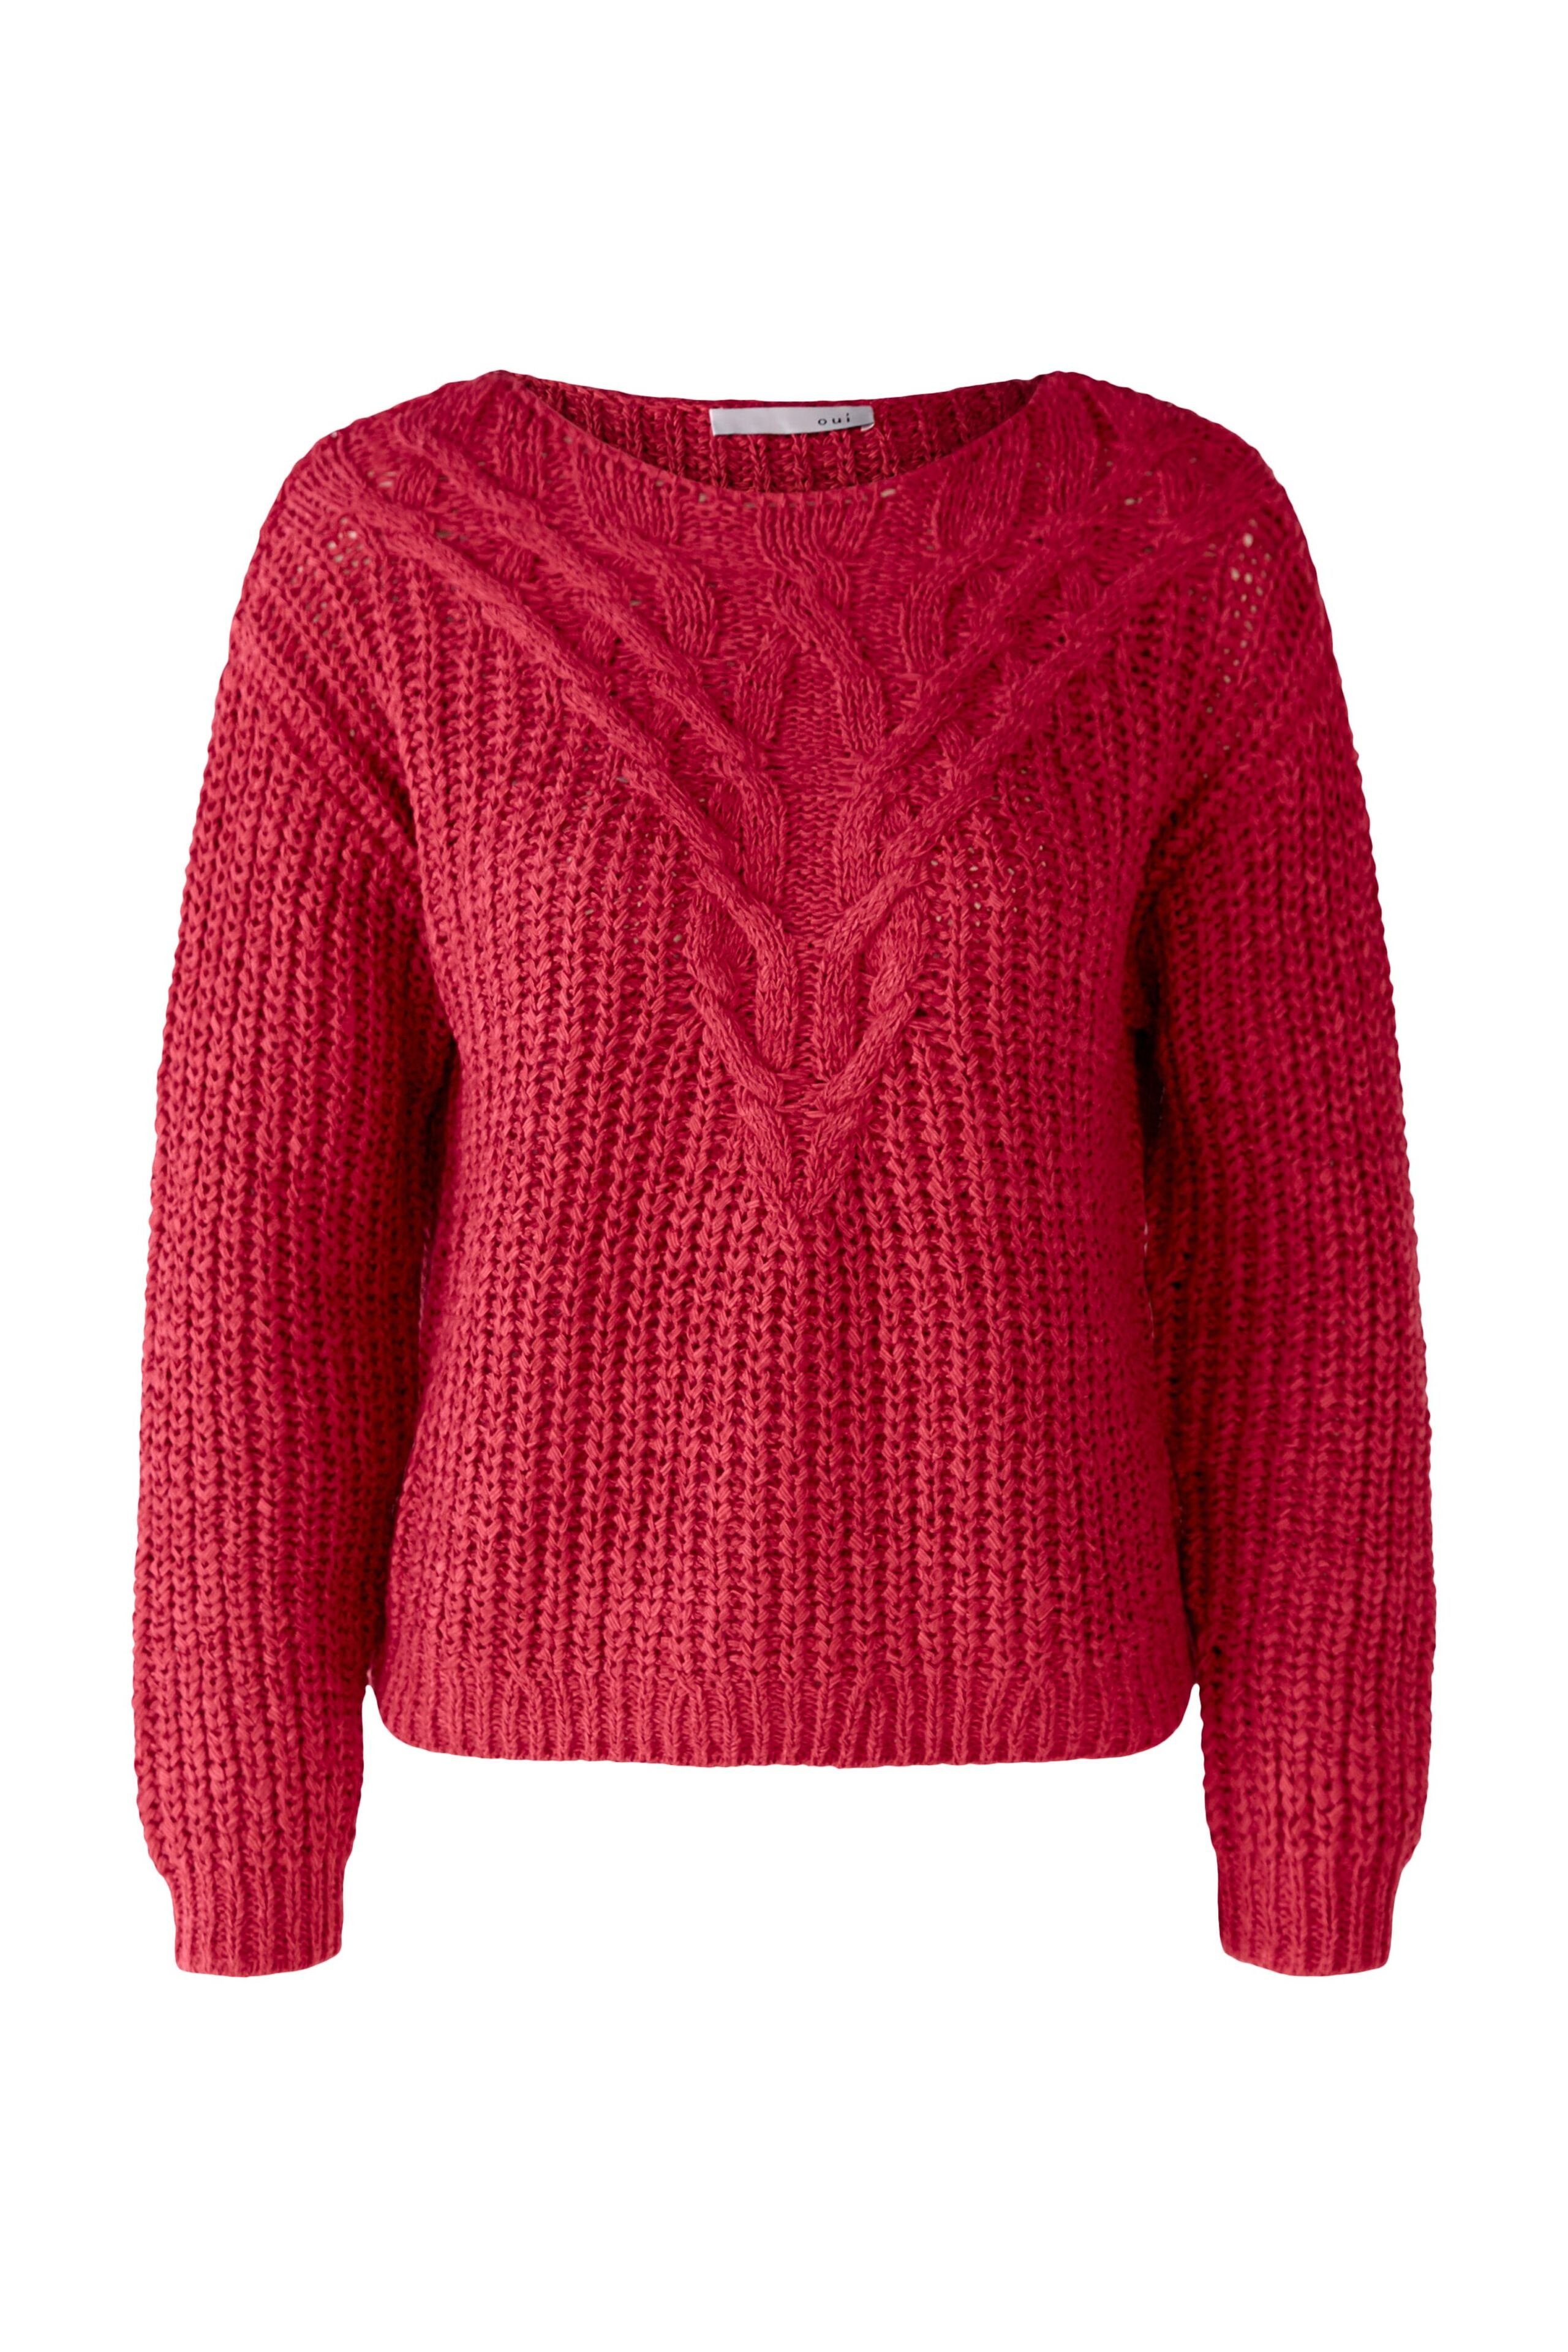 Oui Strickpullover Pullover mit Zopfmuster red